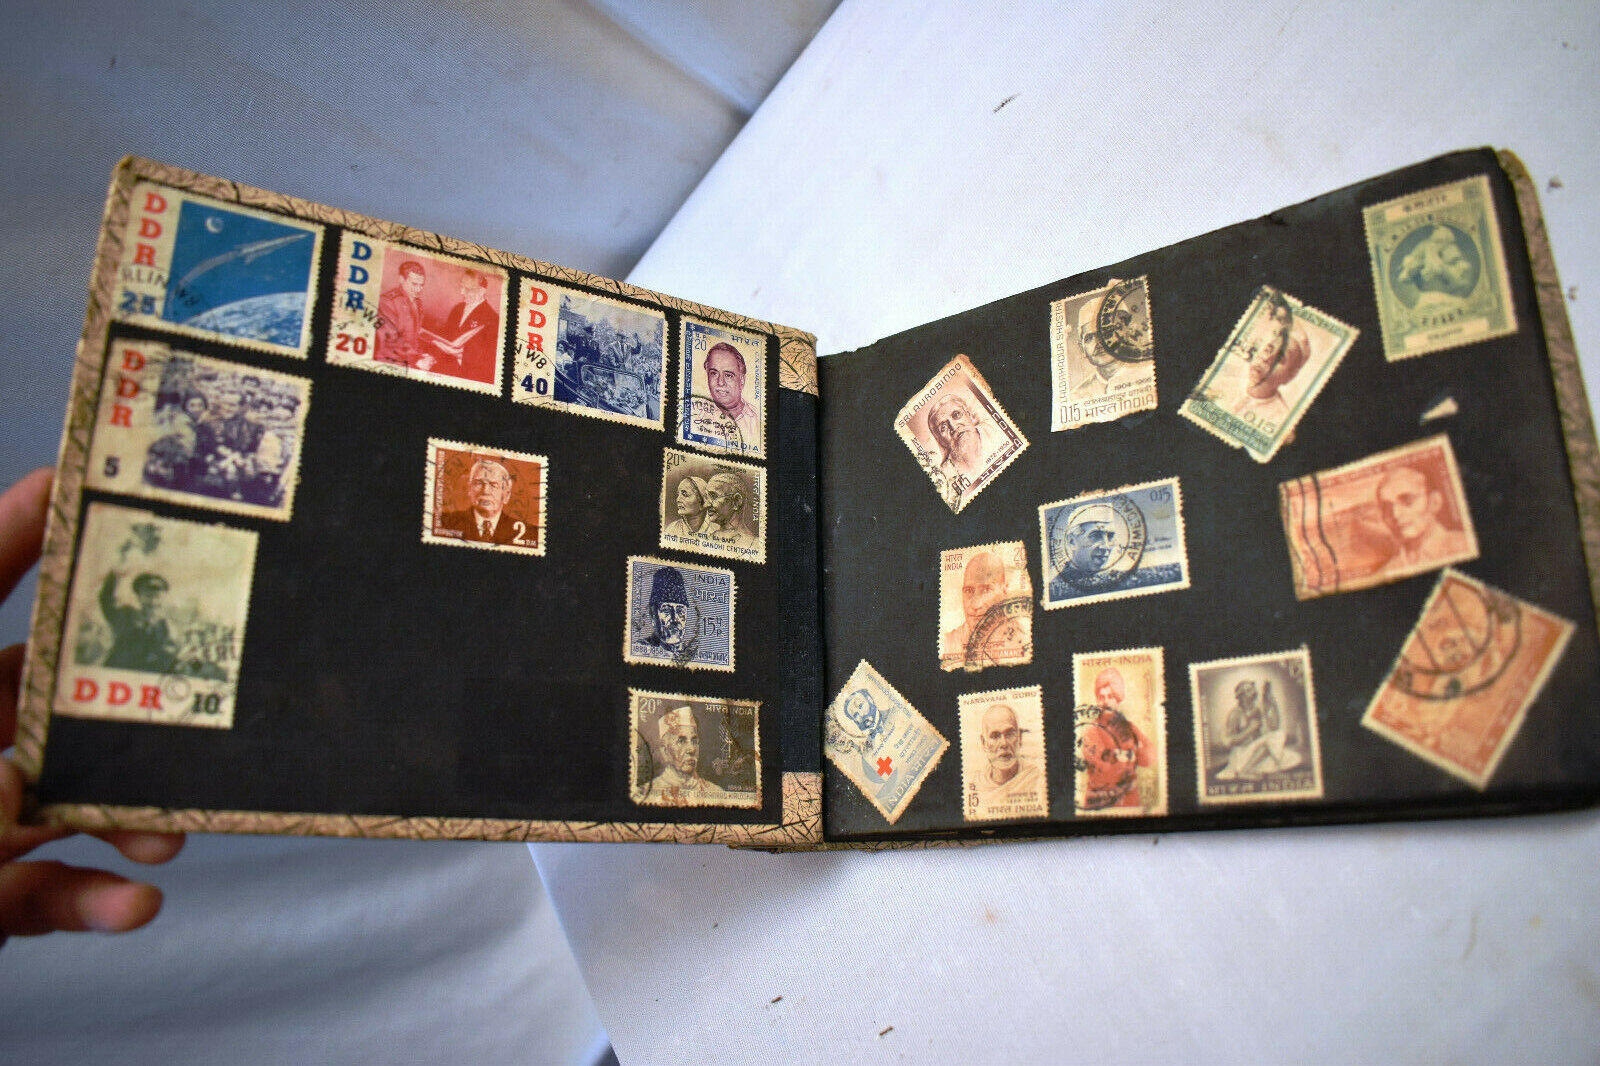 Vintage Stamp Collecting Book Postage Stamps Album Philately Collectibles Rare "